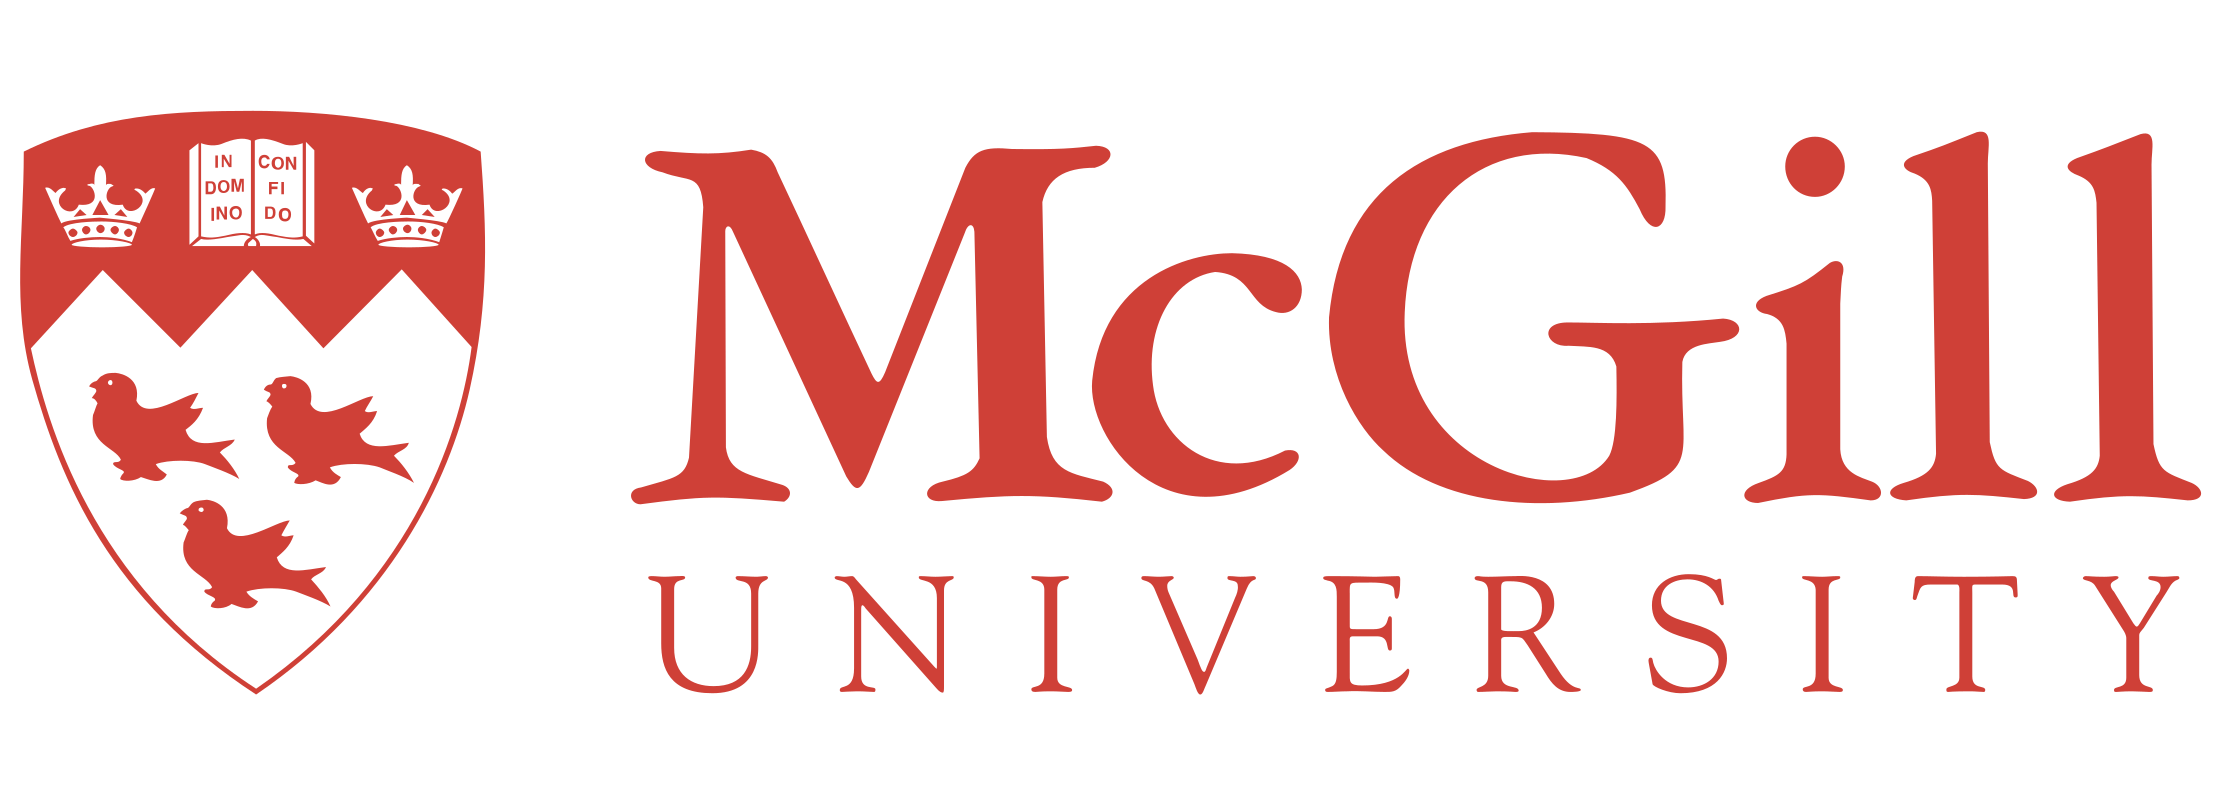 Software Engineering (Engineering) | Bachelor's degree | Computer Science & IT | On Campus | McGill University | Canada